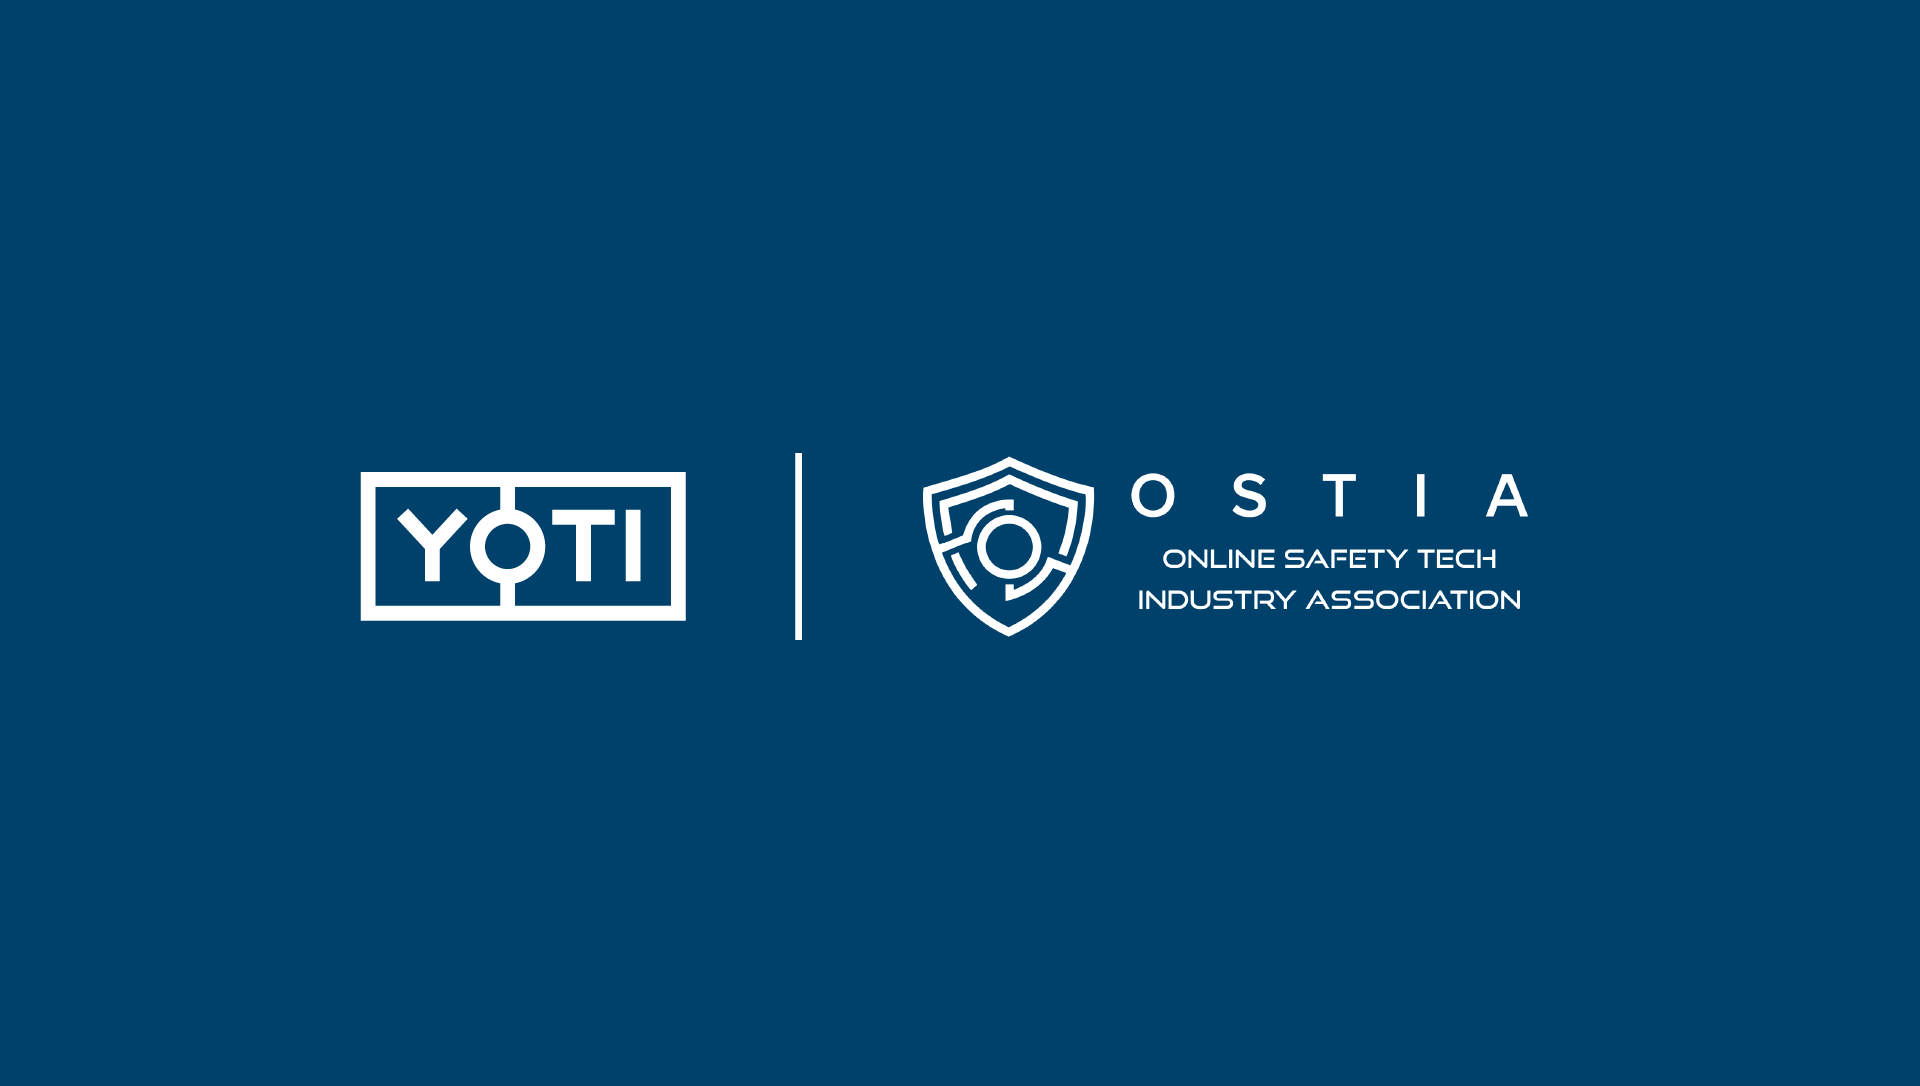 United for a safer internet with OSTIA